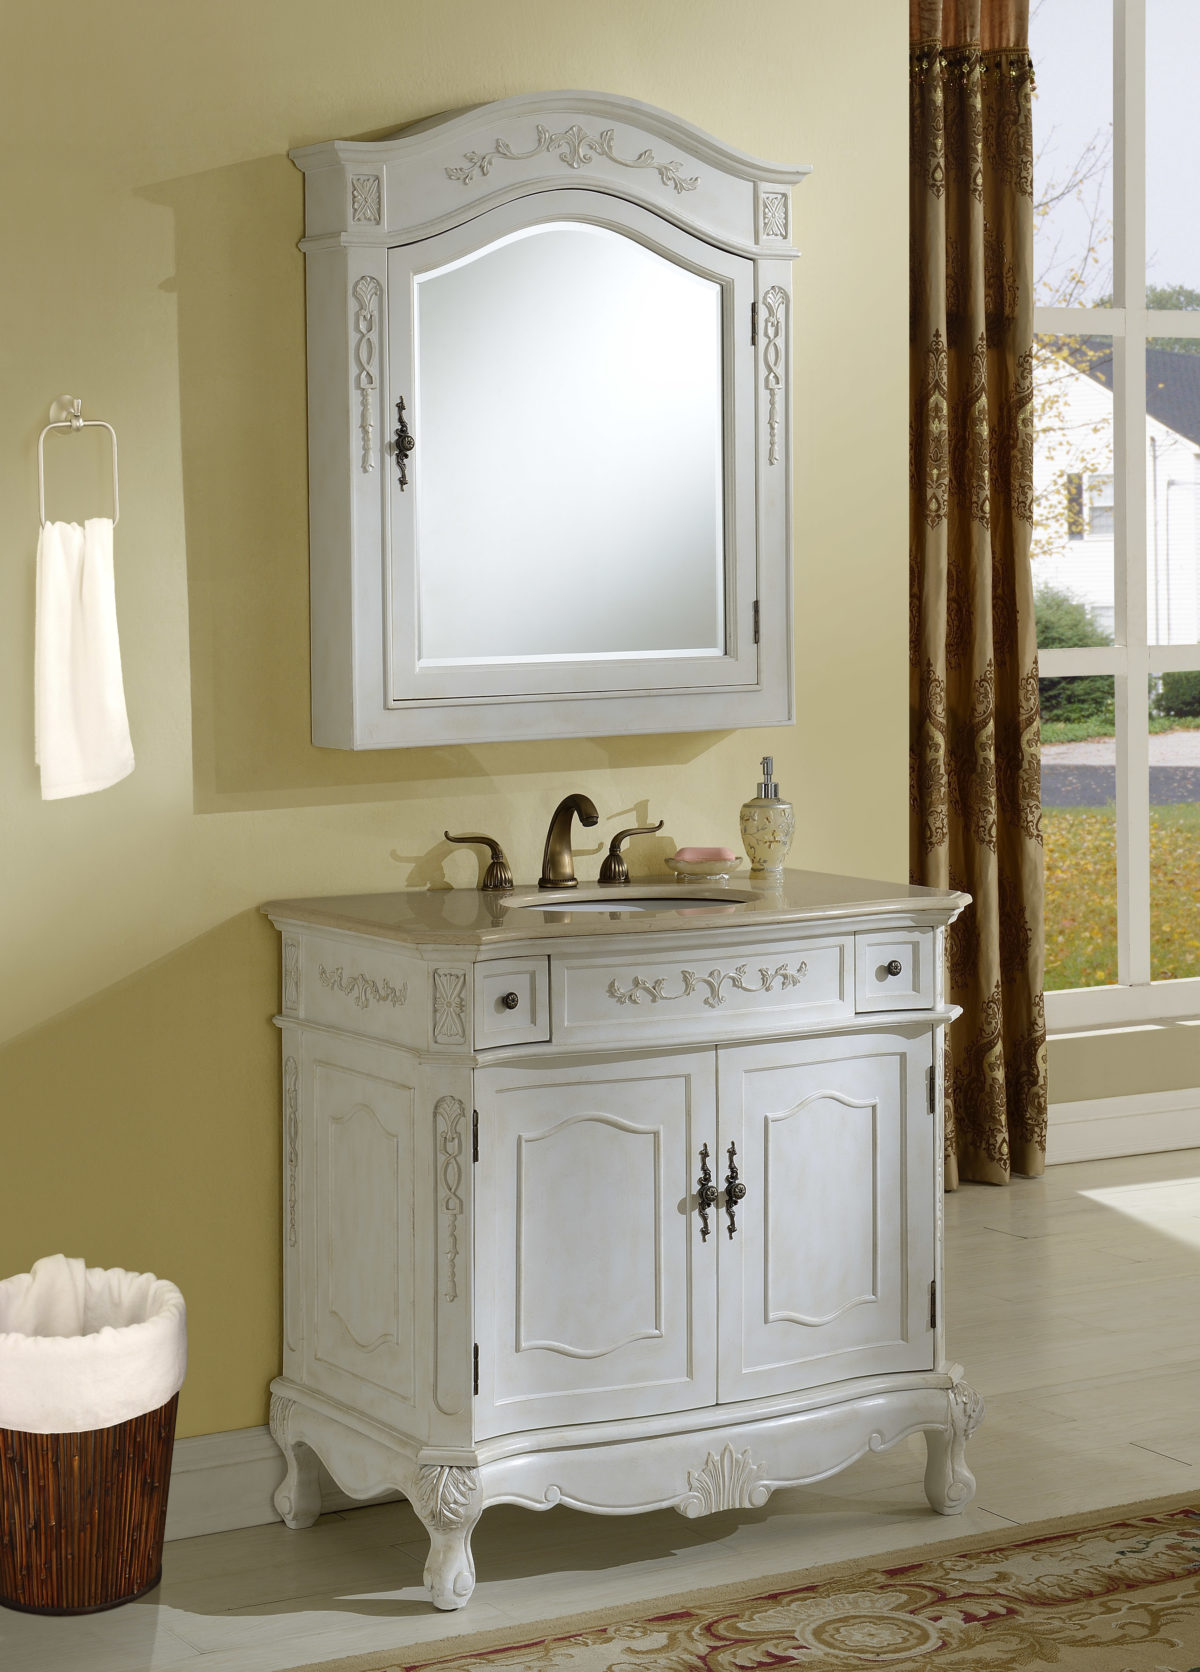 36" Antique White Finish Vanity with Mirror, Med Cab, and Linen Cabinet Options